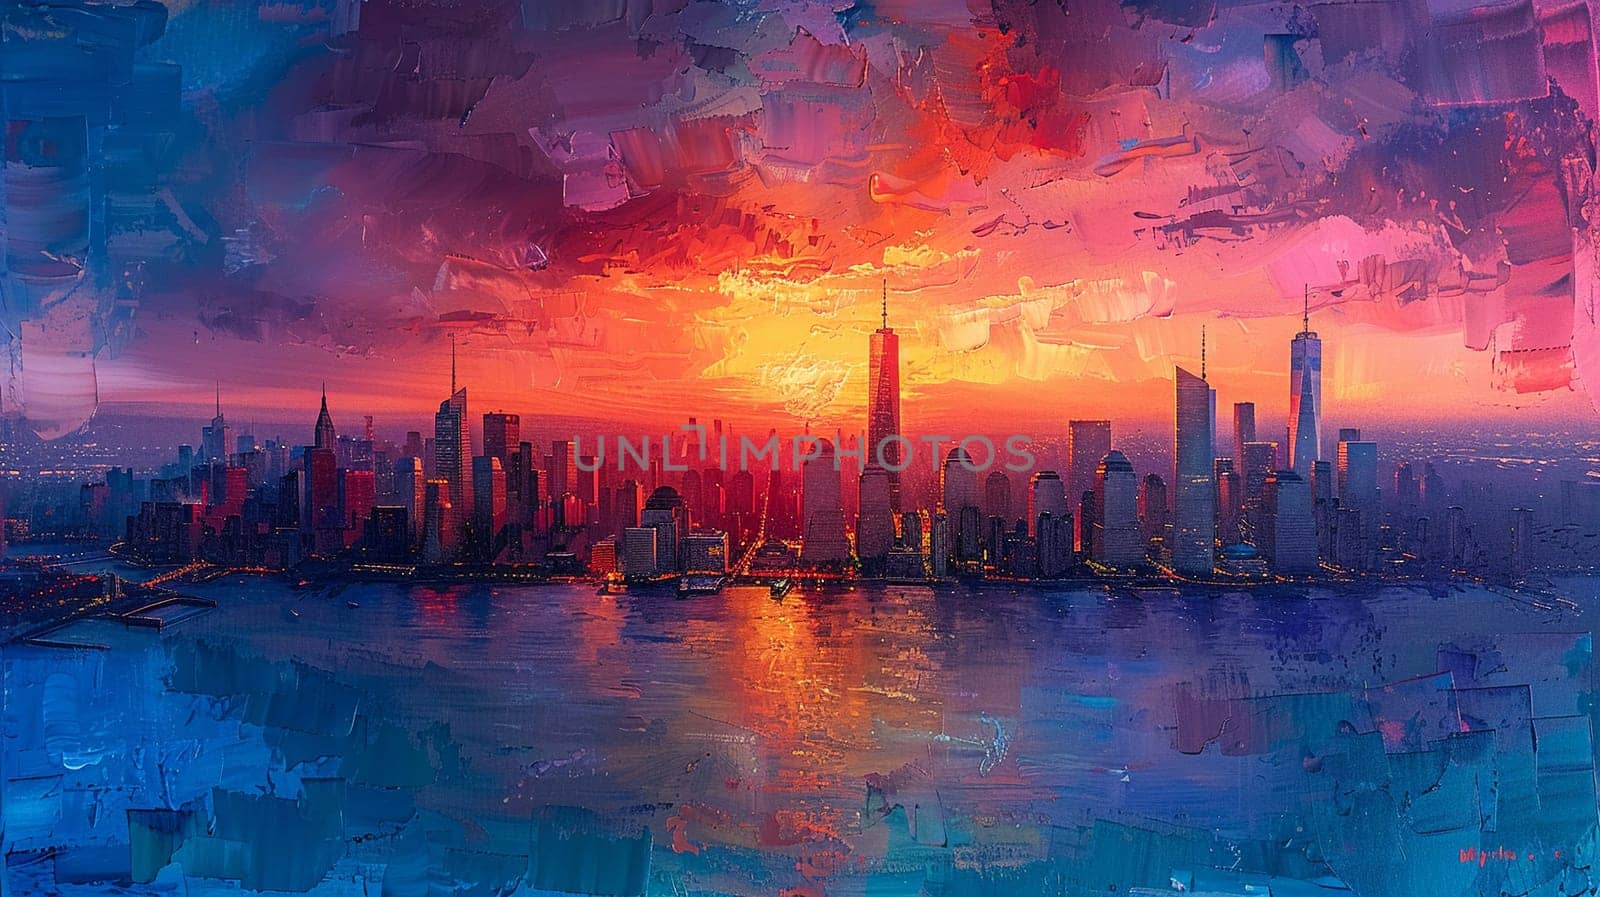 Cityscape from a high vantage point painted in a post-impressionist style, with vivid colors and bold brushwork.